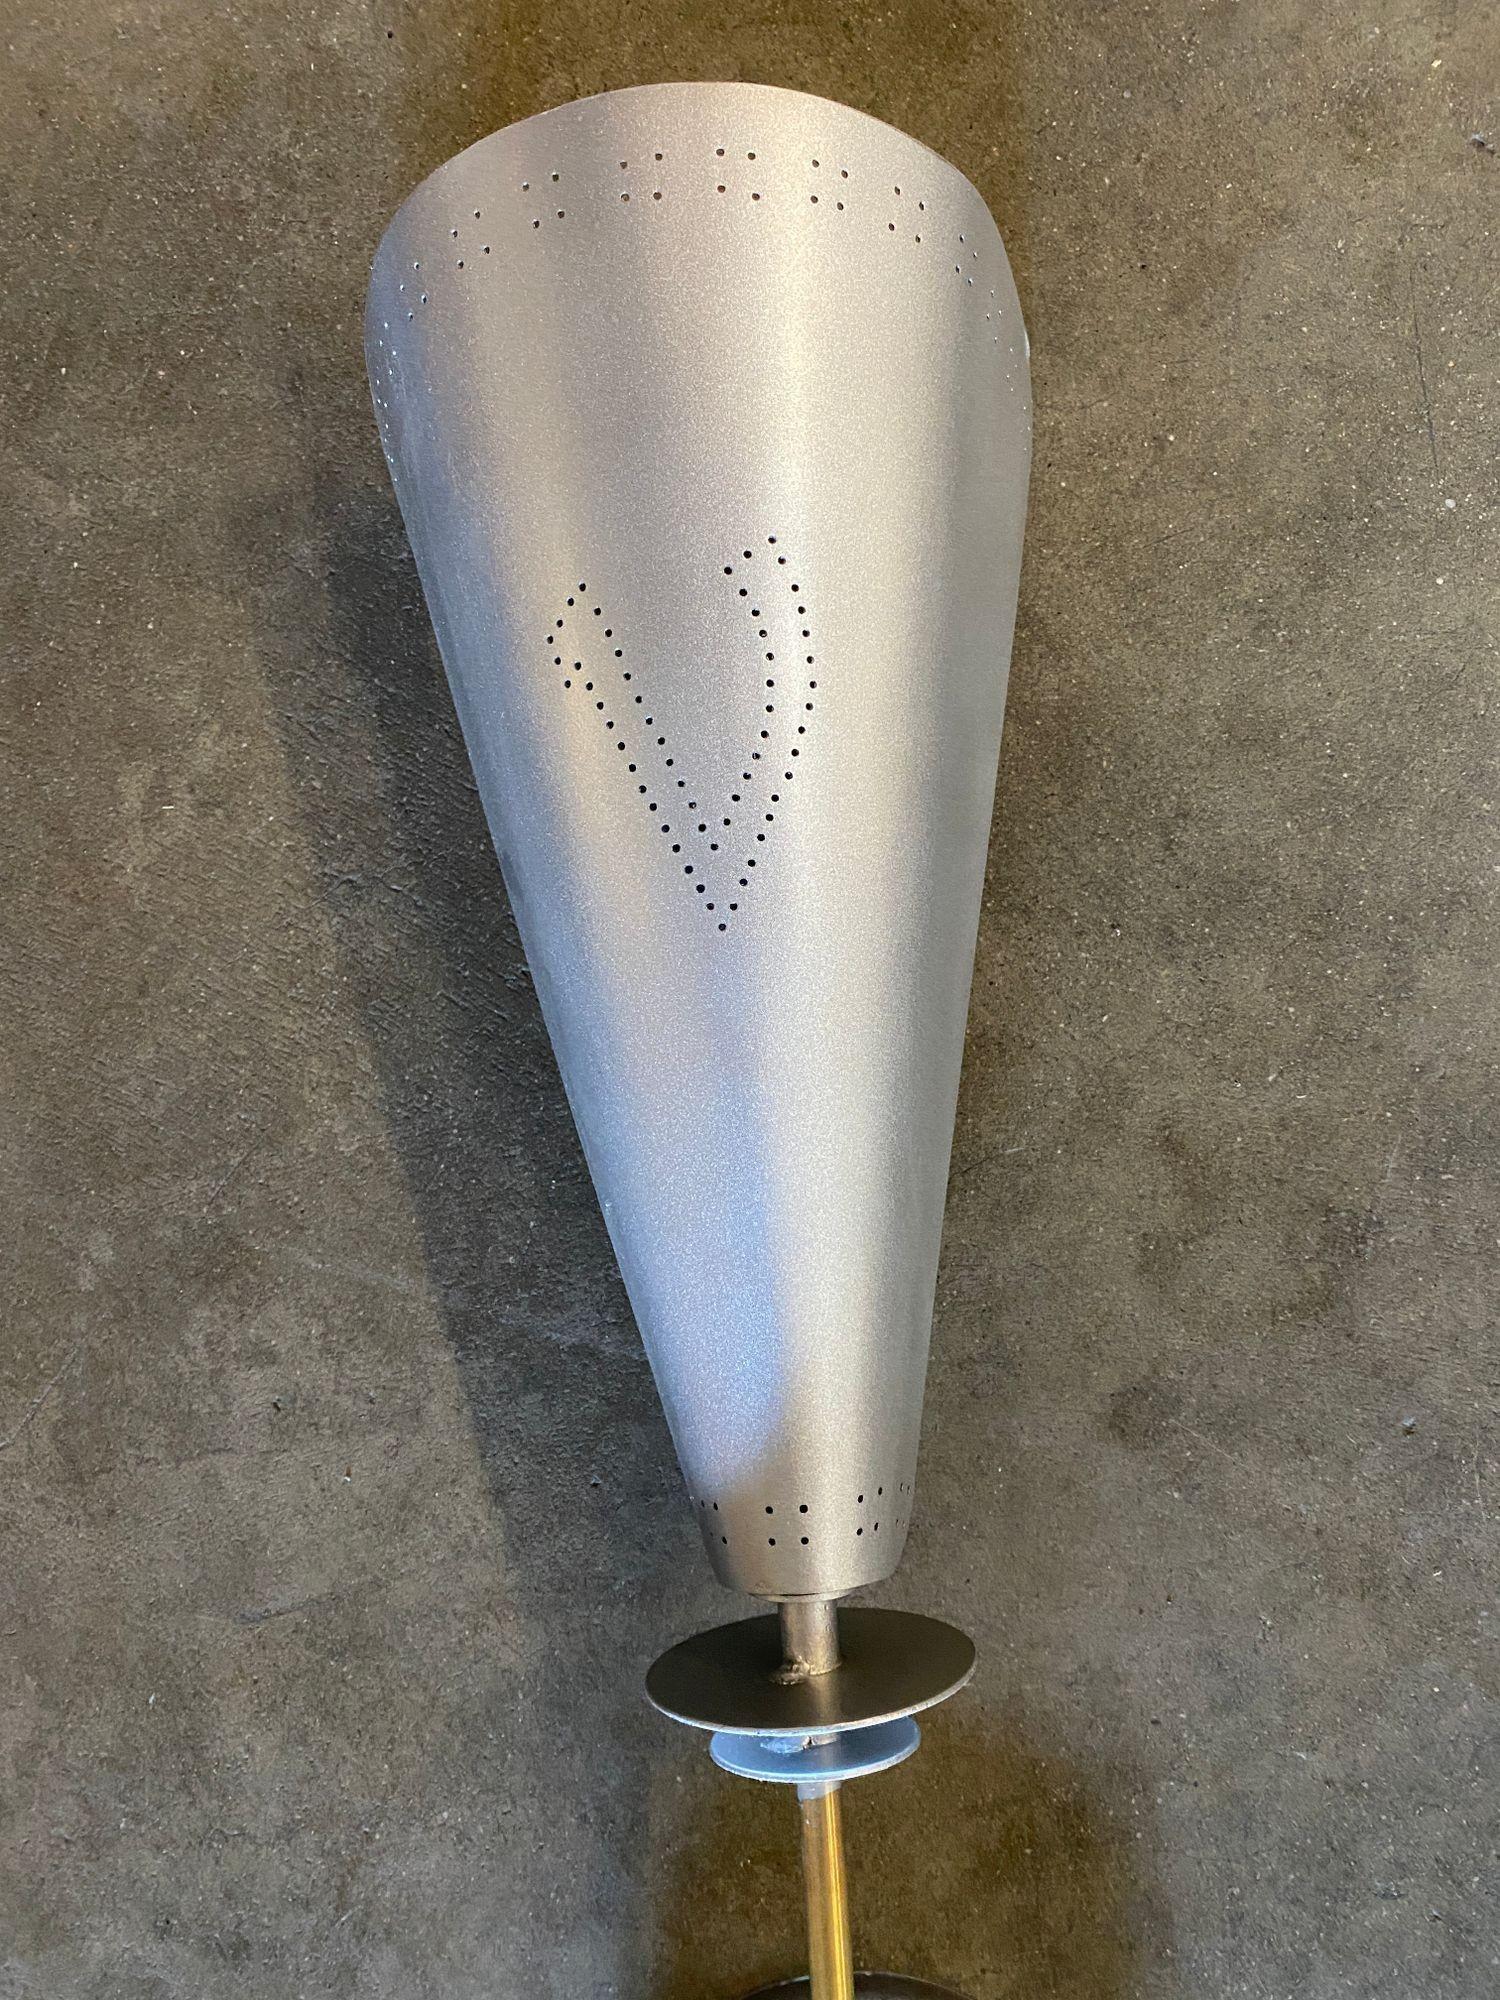 Italian brushed aluminum mid-century wall sconces with polished brash featuring a torchiere with a large folded aluminum shade connected to a brass. There is a dot pattern forming a 